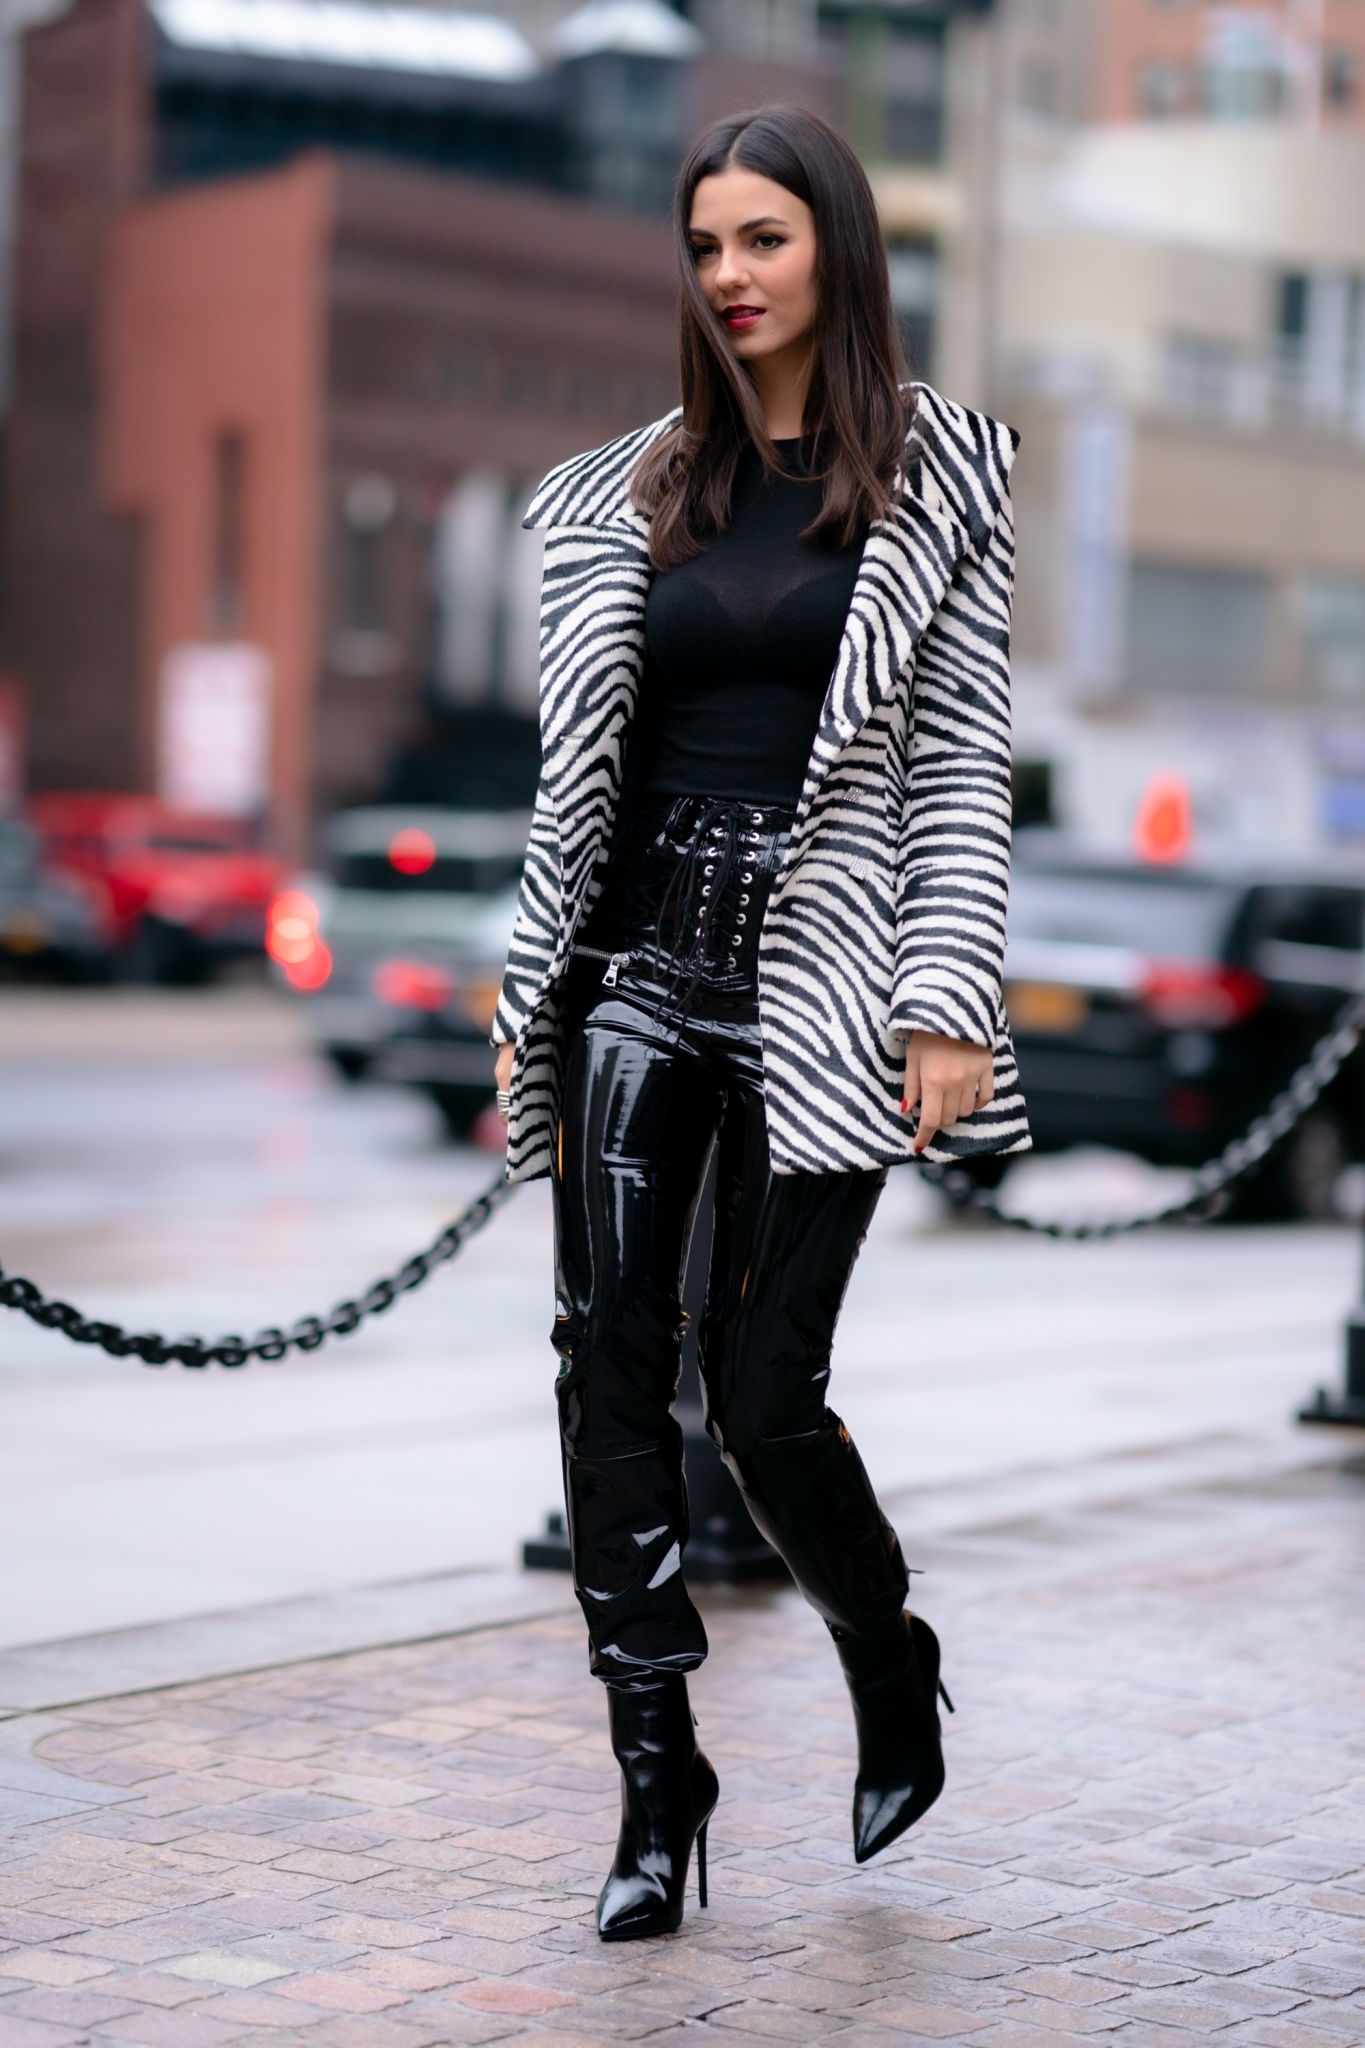 Victoria Justice out in Tribeca